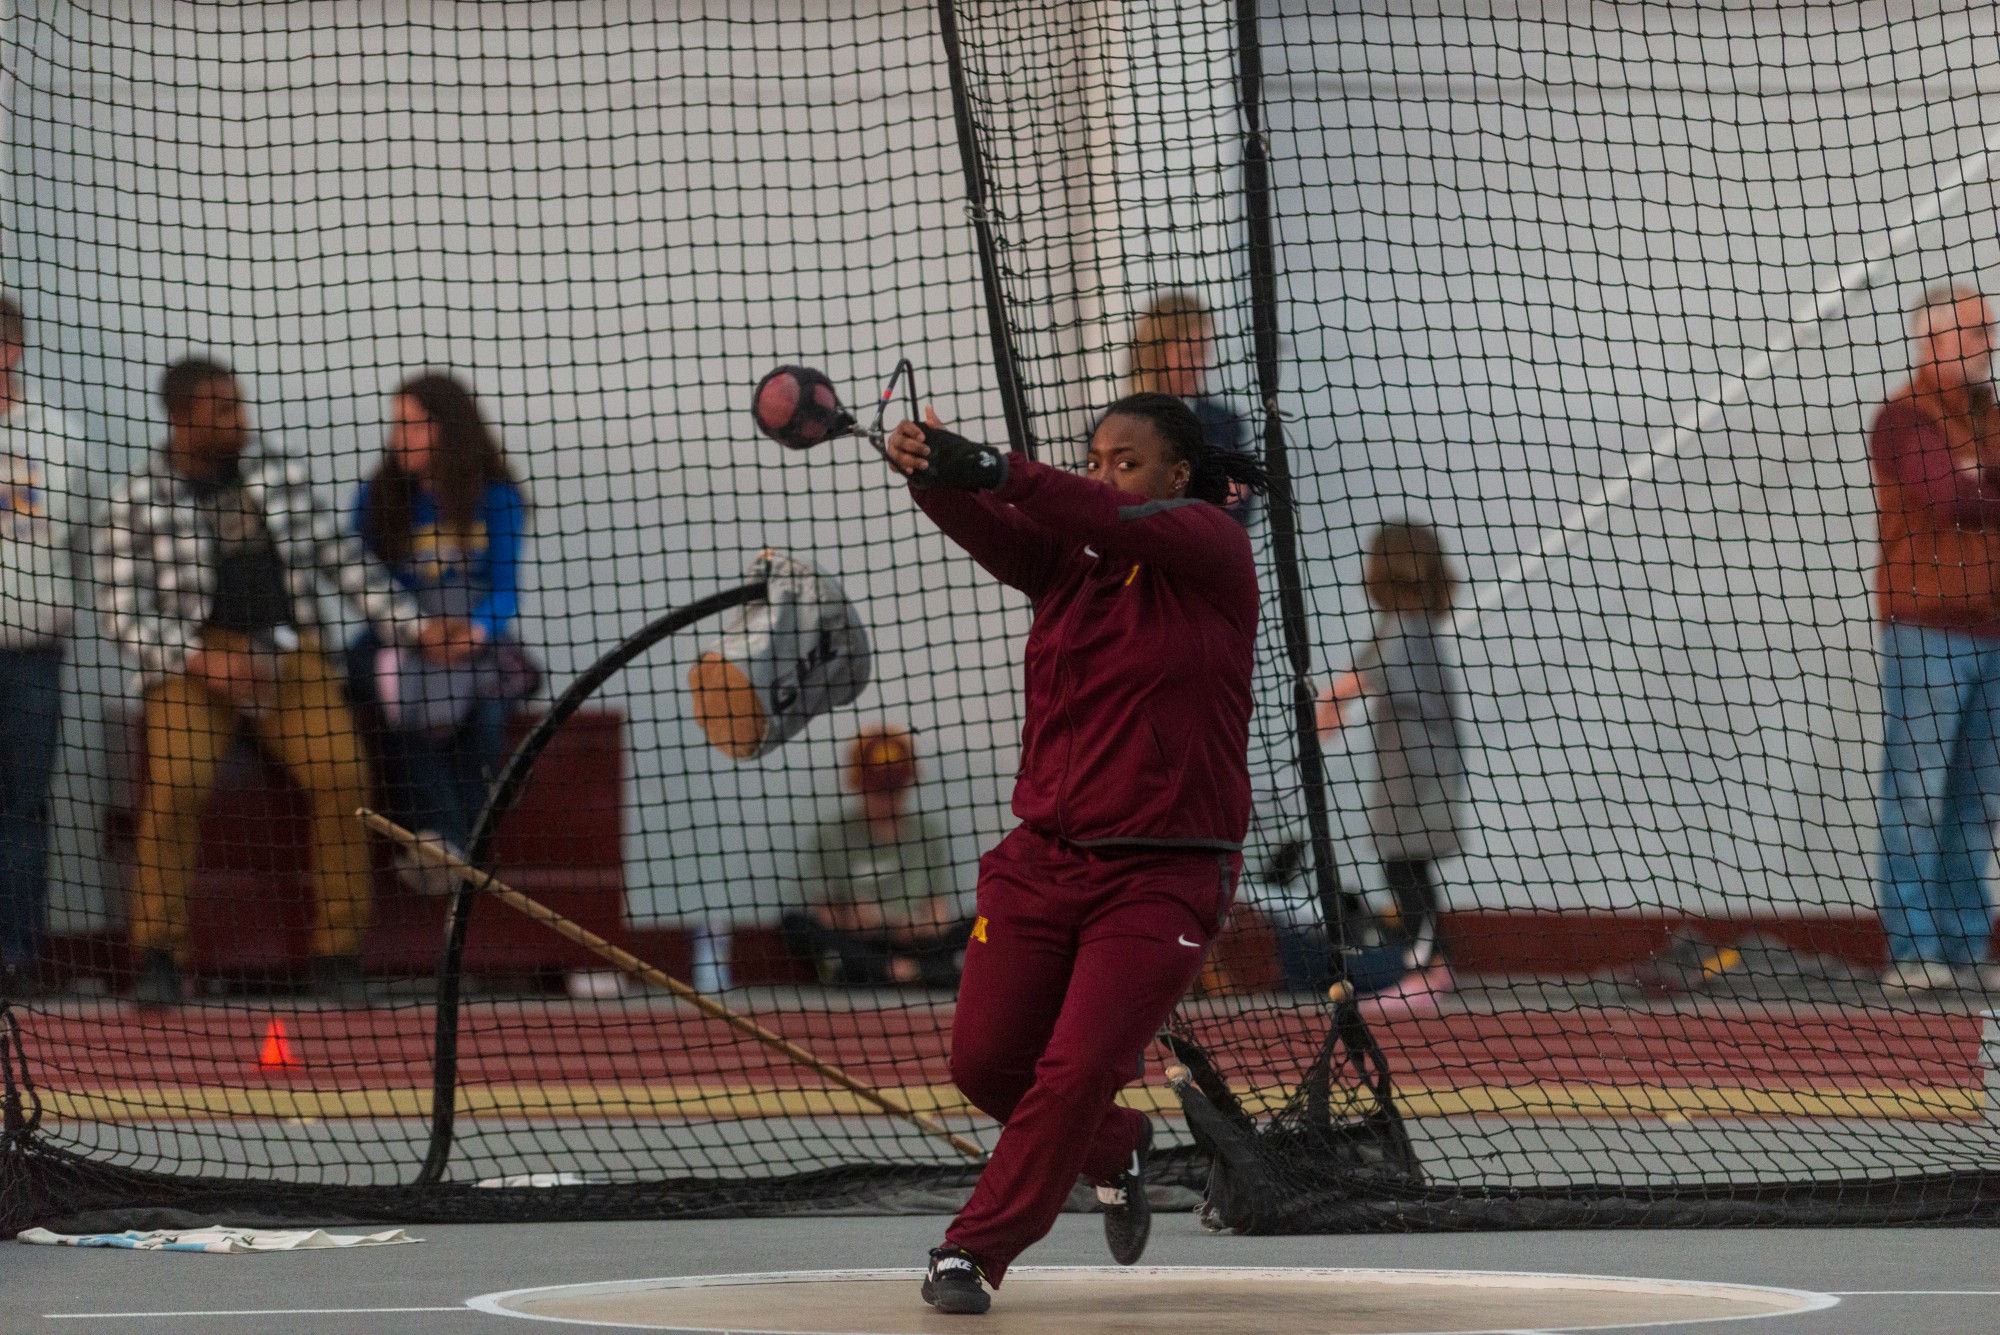 Gophers Junior Devia Brown competes in the weight throw at the Minnesota Cold Classic at the University of Minnesota Fieldhouse on Friday, Feb. 21.